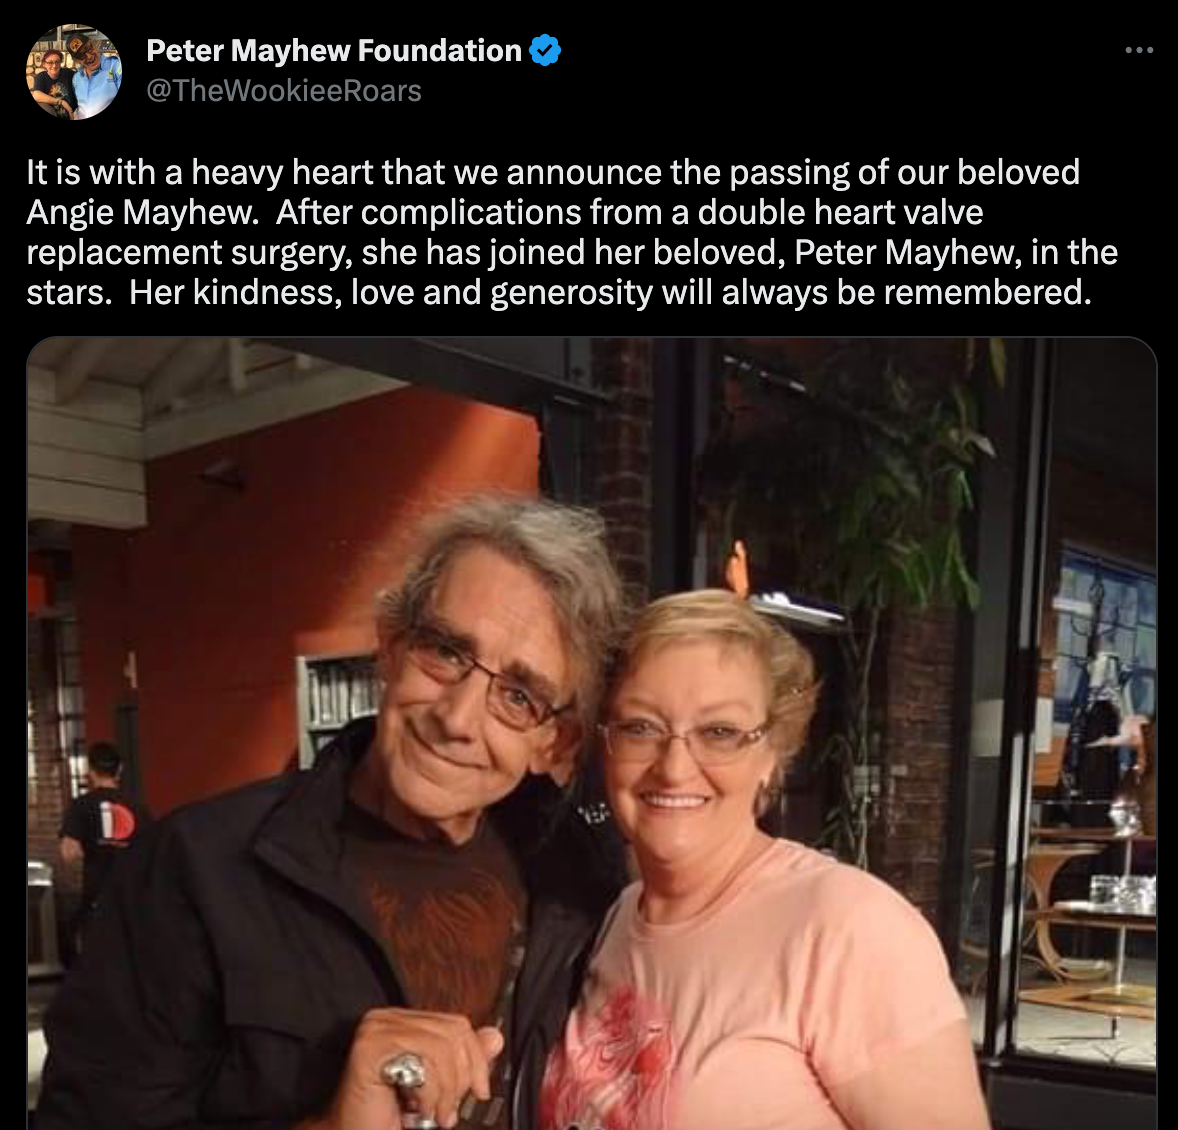 ‘Peter Mayhew Foundation’ announces Angie Mayhew’s death